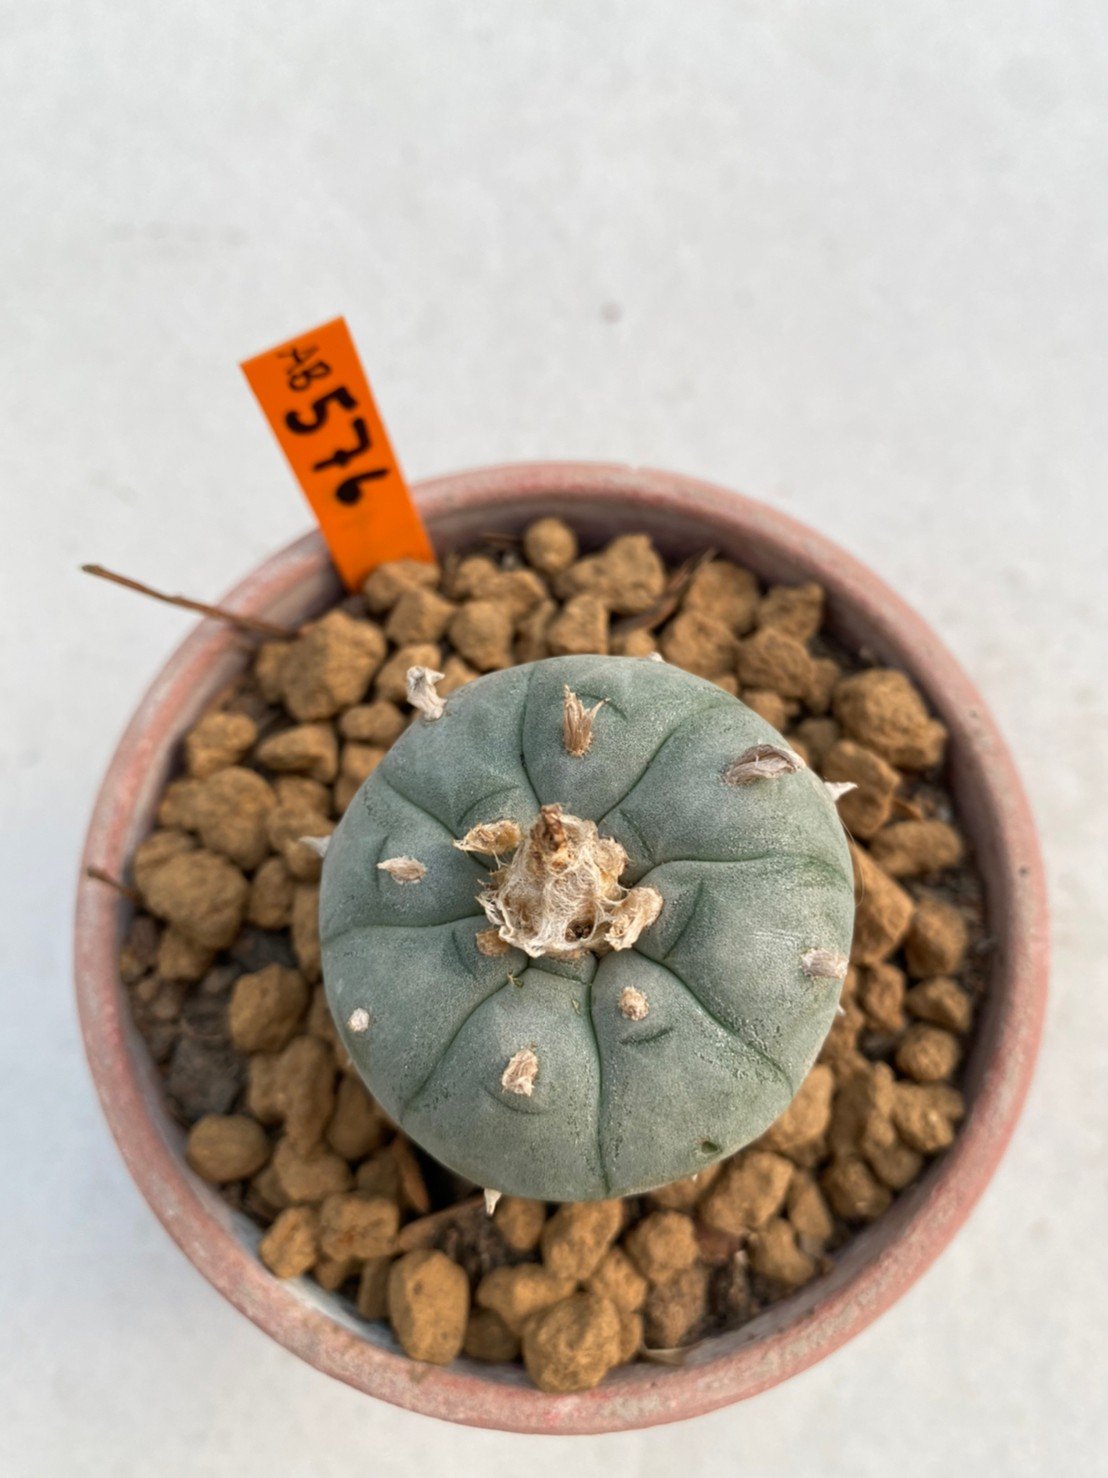 Lophophora Williamsii 4.5-5.5 cm 10 years old ownroot from seed flowering